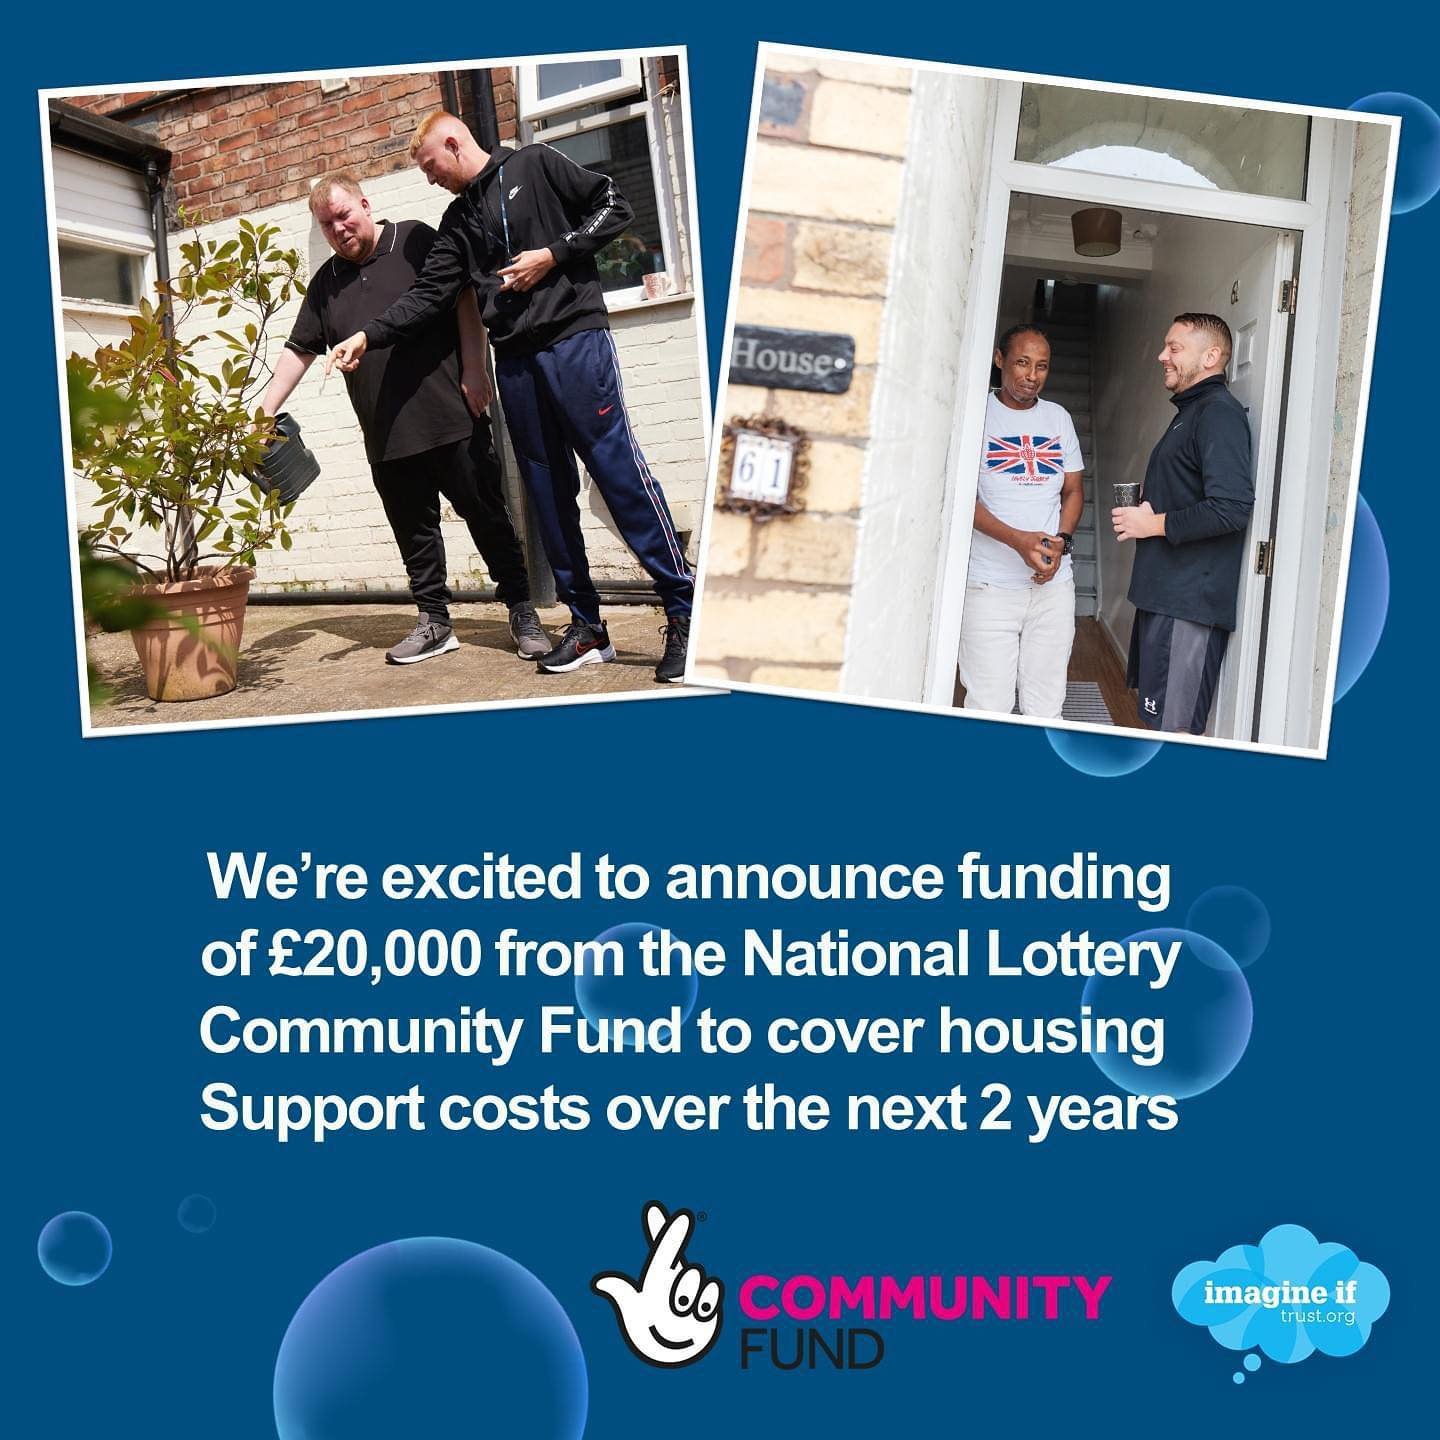 We&rsquo;re delighted to have received funding from the National Lottery Community Fund towards our supported housing project! This funding will fund the employment of a part-time support worker, working two days per week over the next 2 years, a key